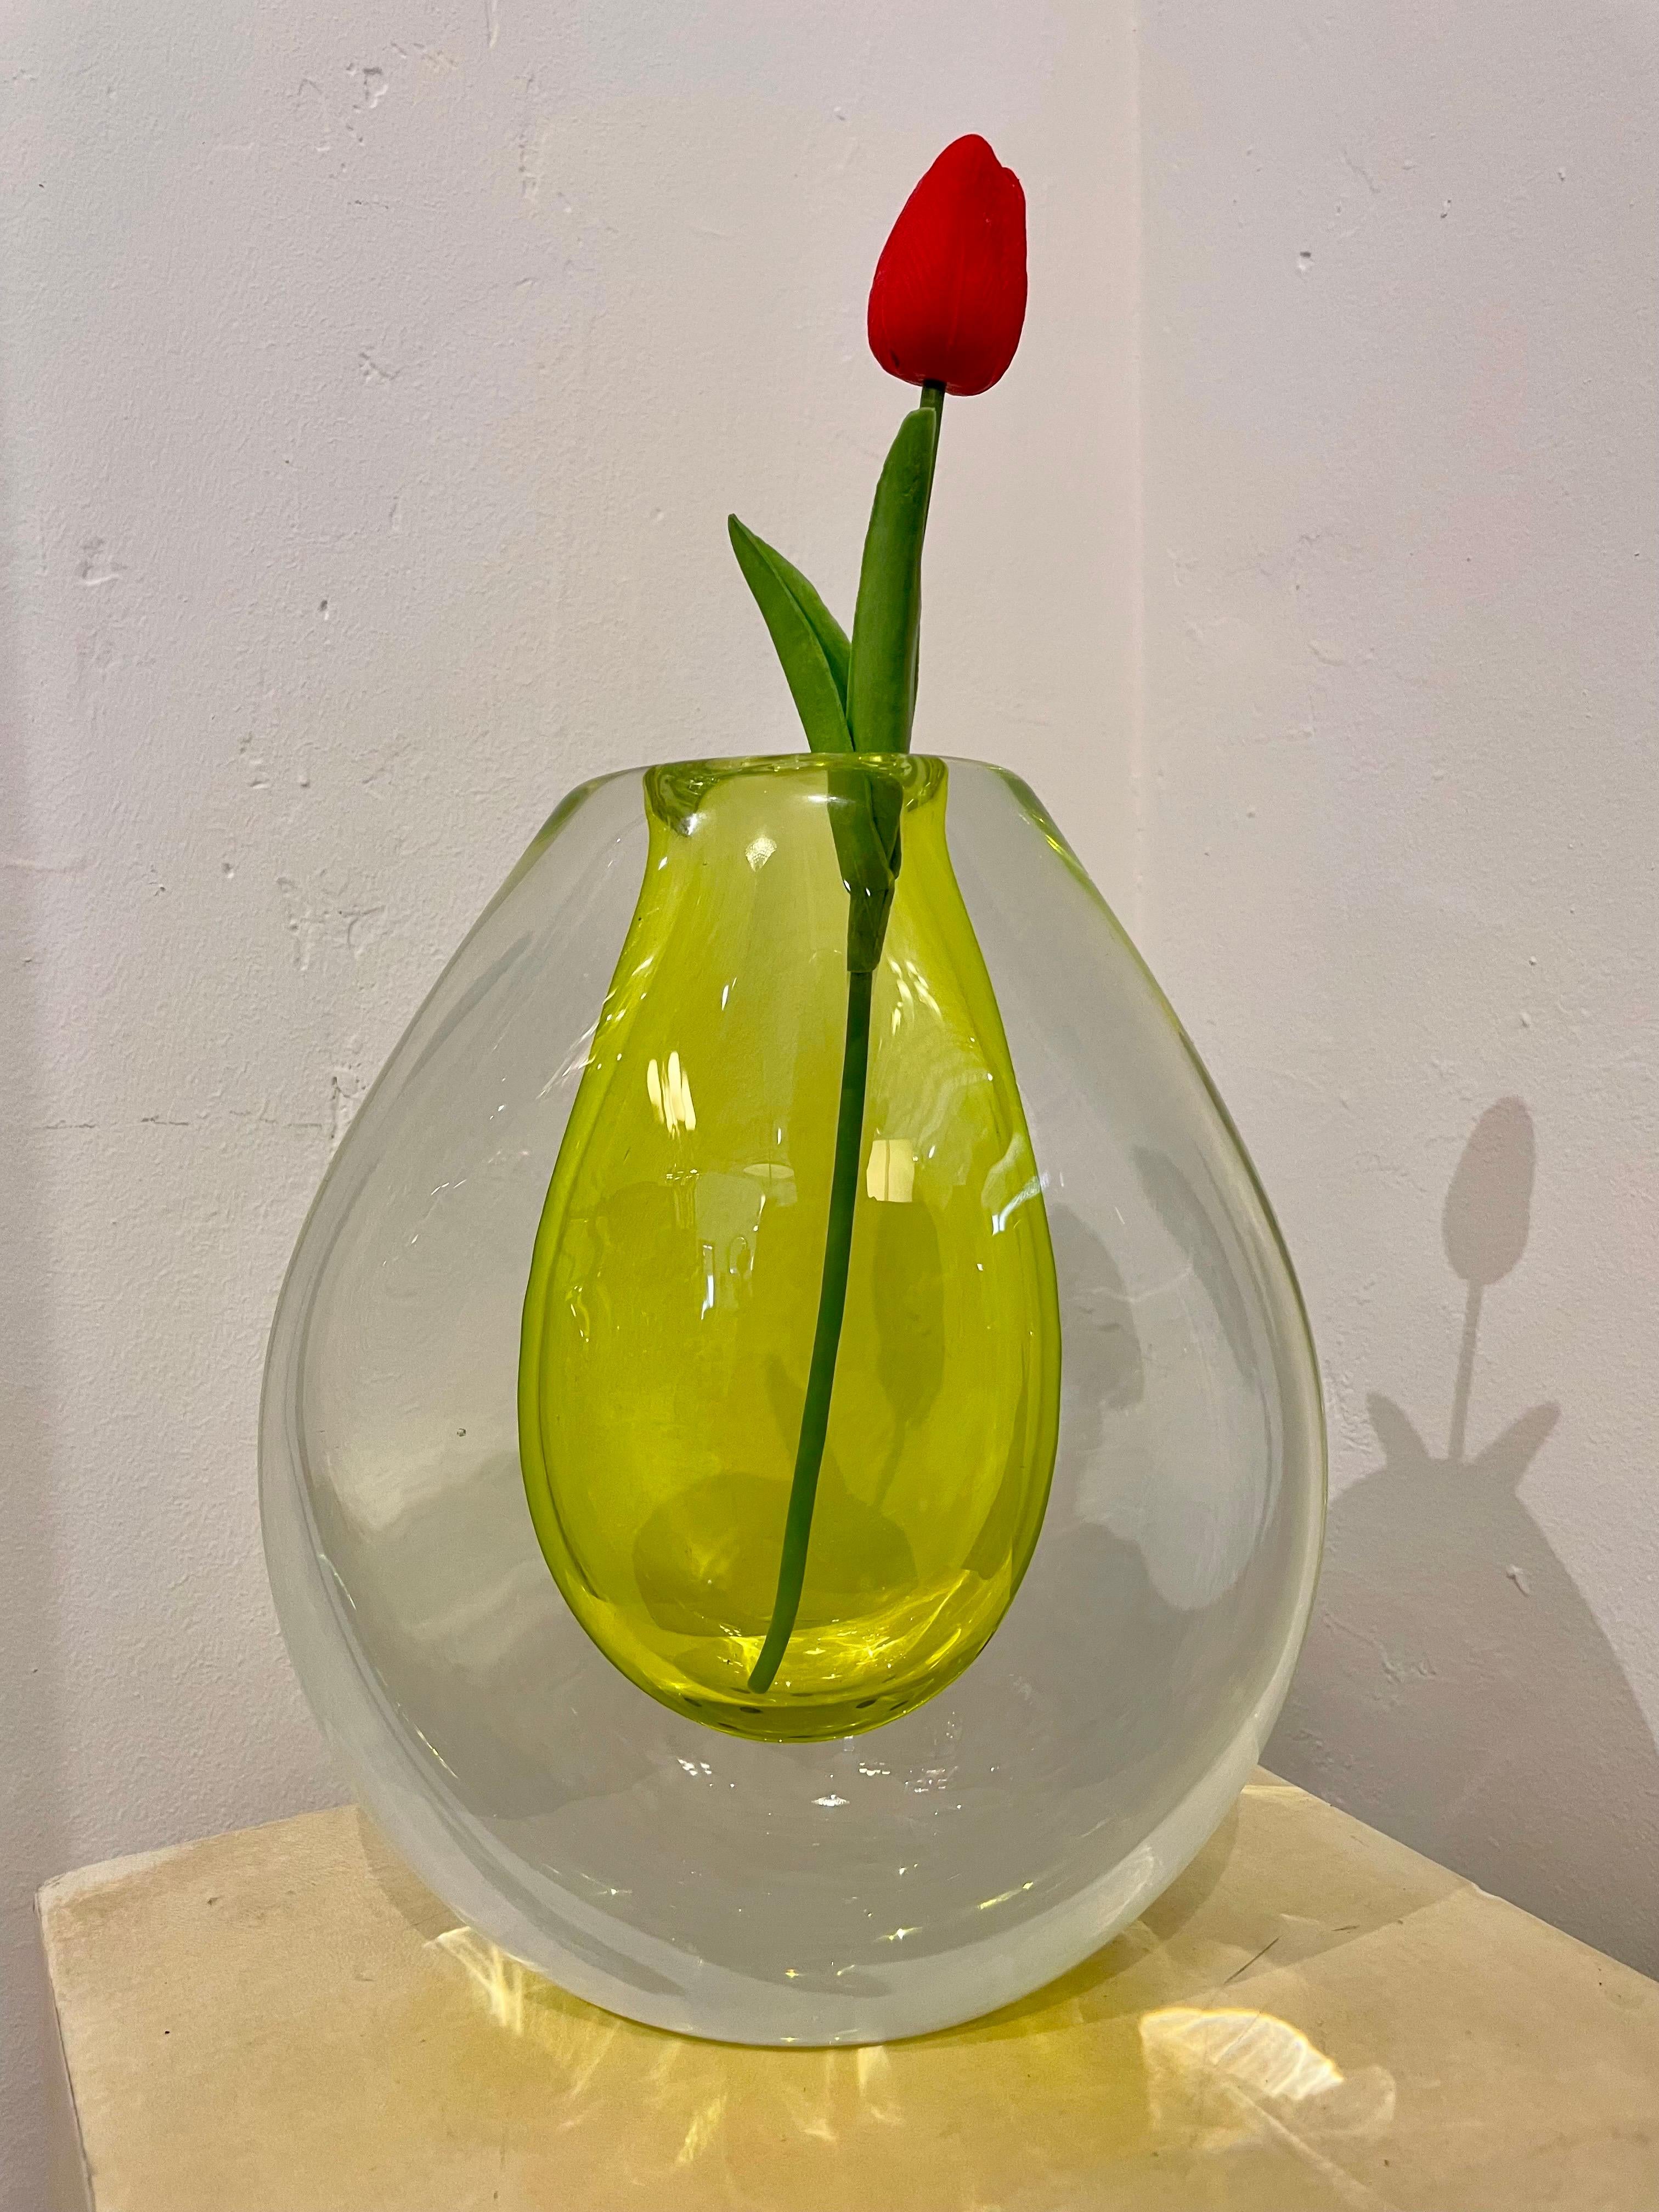 Made by Seguso for Poli, this incredible citron colored Murano glass floating inside a larger clear glass surround makes this large vase quite heavy. It is so vivid in color and beauty. Signed to bottom.